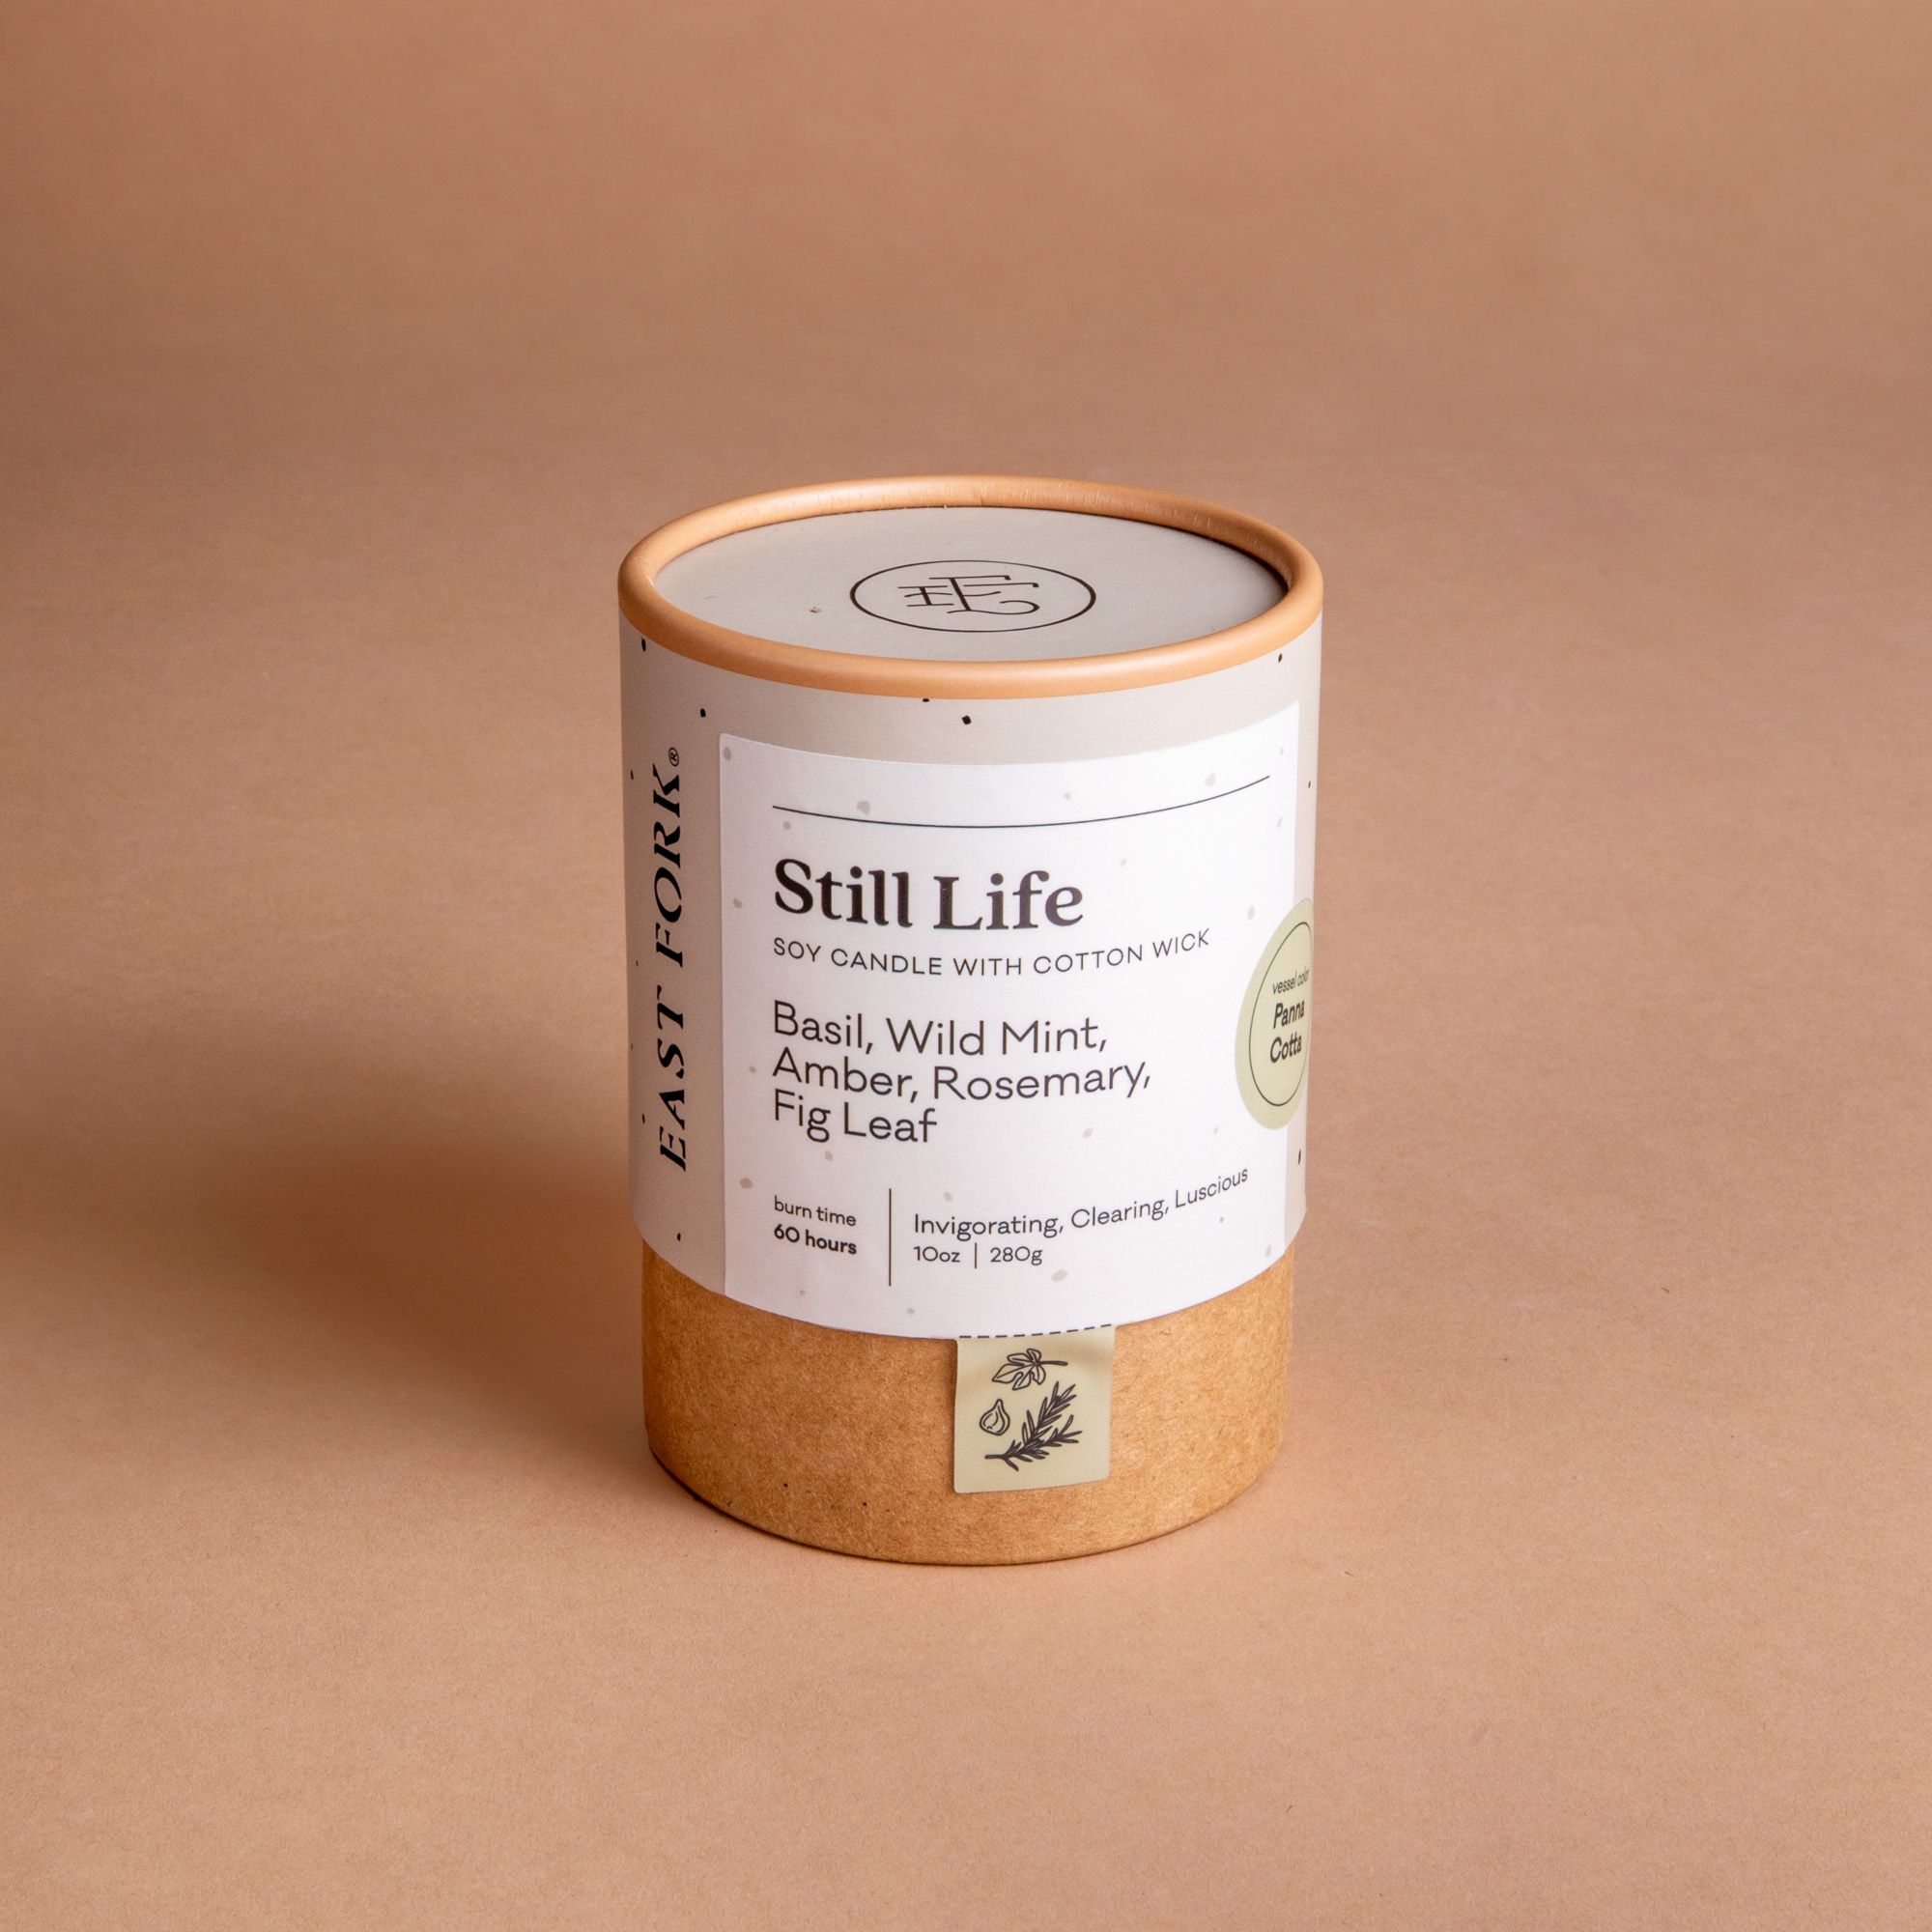 Large cardboard packaging tube with a candle inside with branding on it that says 'Still Life'